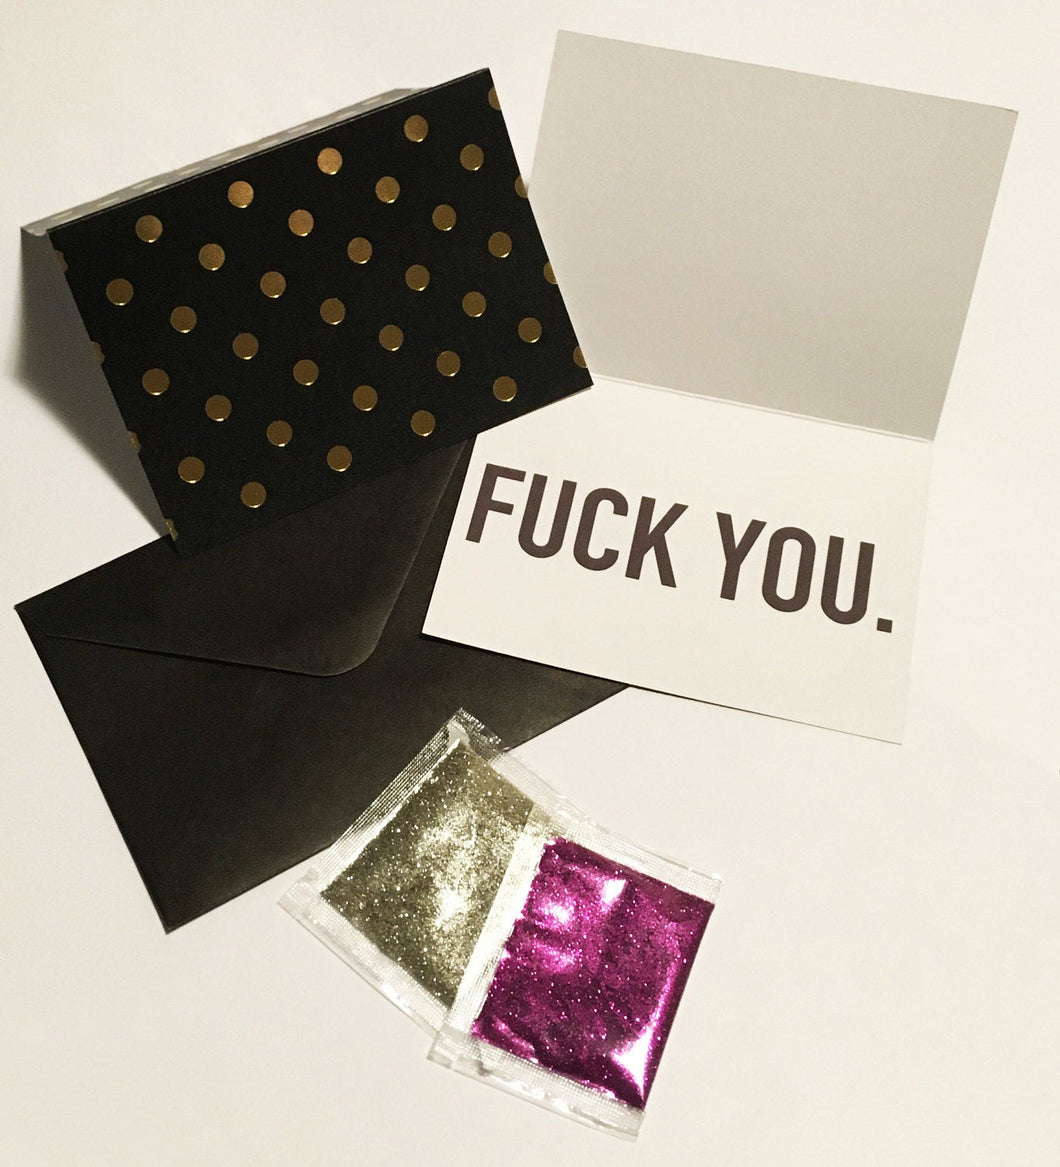 F*ck you glitter bomb card // Funny Gift // Prank Gift // Glitter // Rude Glitter bomb Card // Funny Friendship // Enemy Card // Funny Card